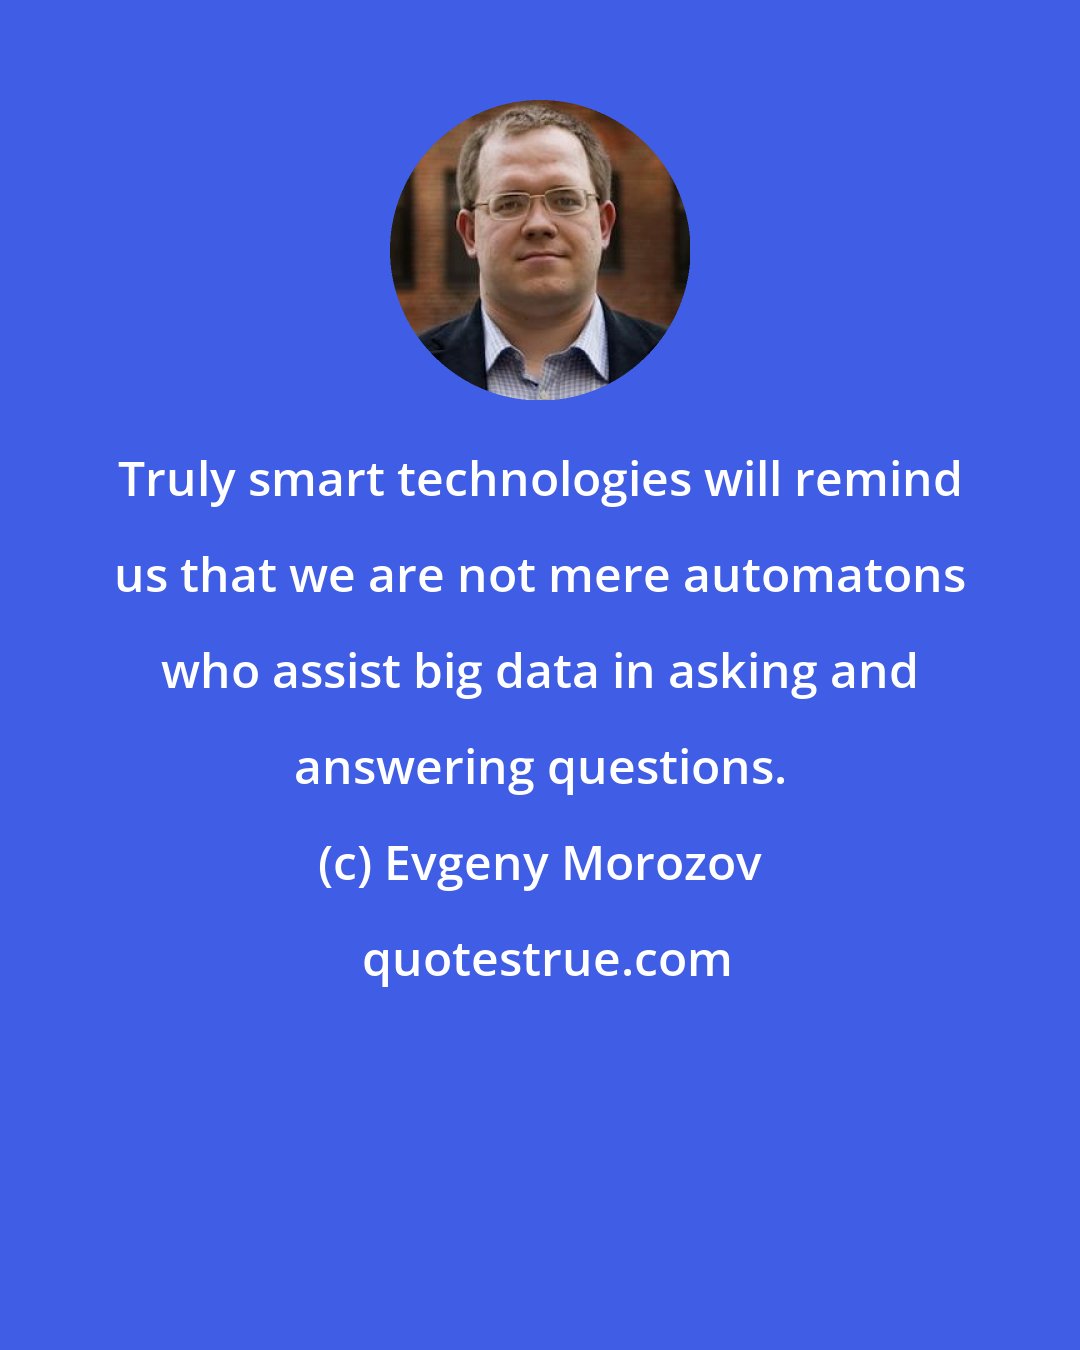 Evgeny Morozov: Truly smart technologies will remind us that we are not mere automatons who assist big data in asking and answering questions.